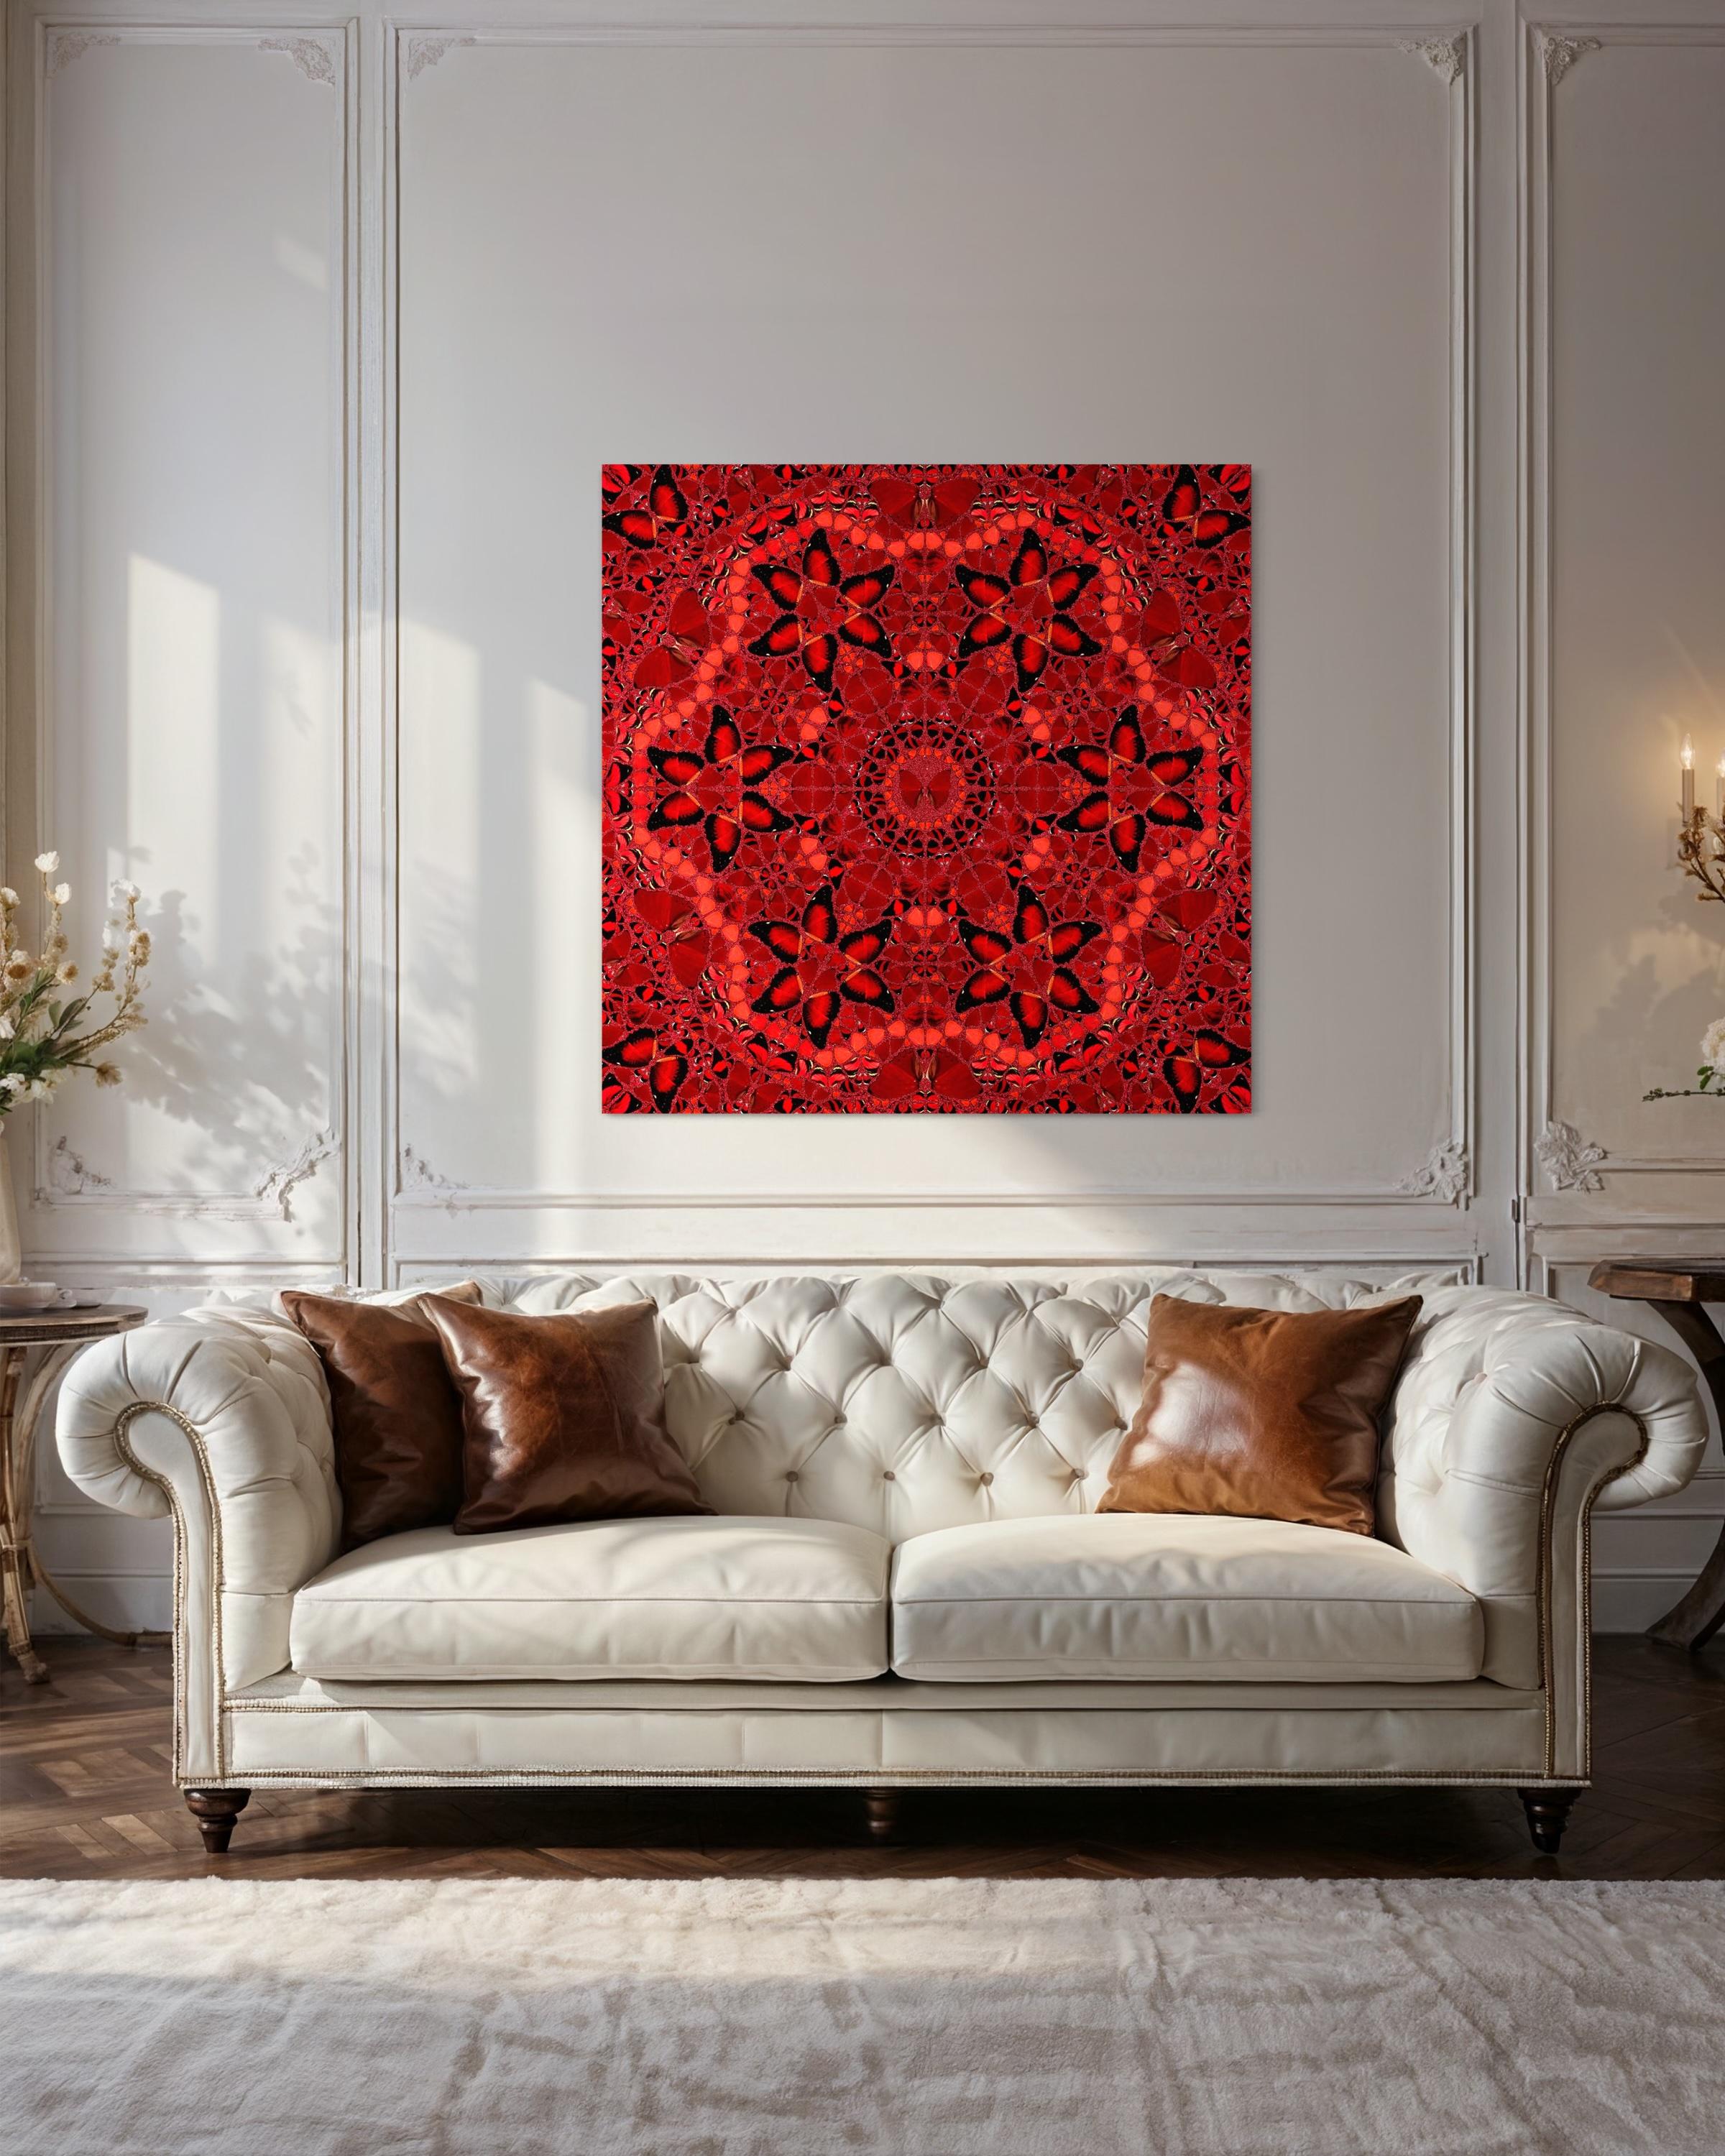 H10-1 Wu Zetian - Red Print by Damien Hirst